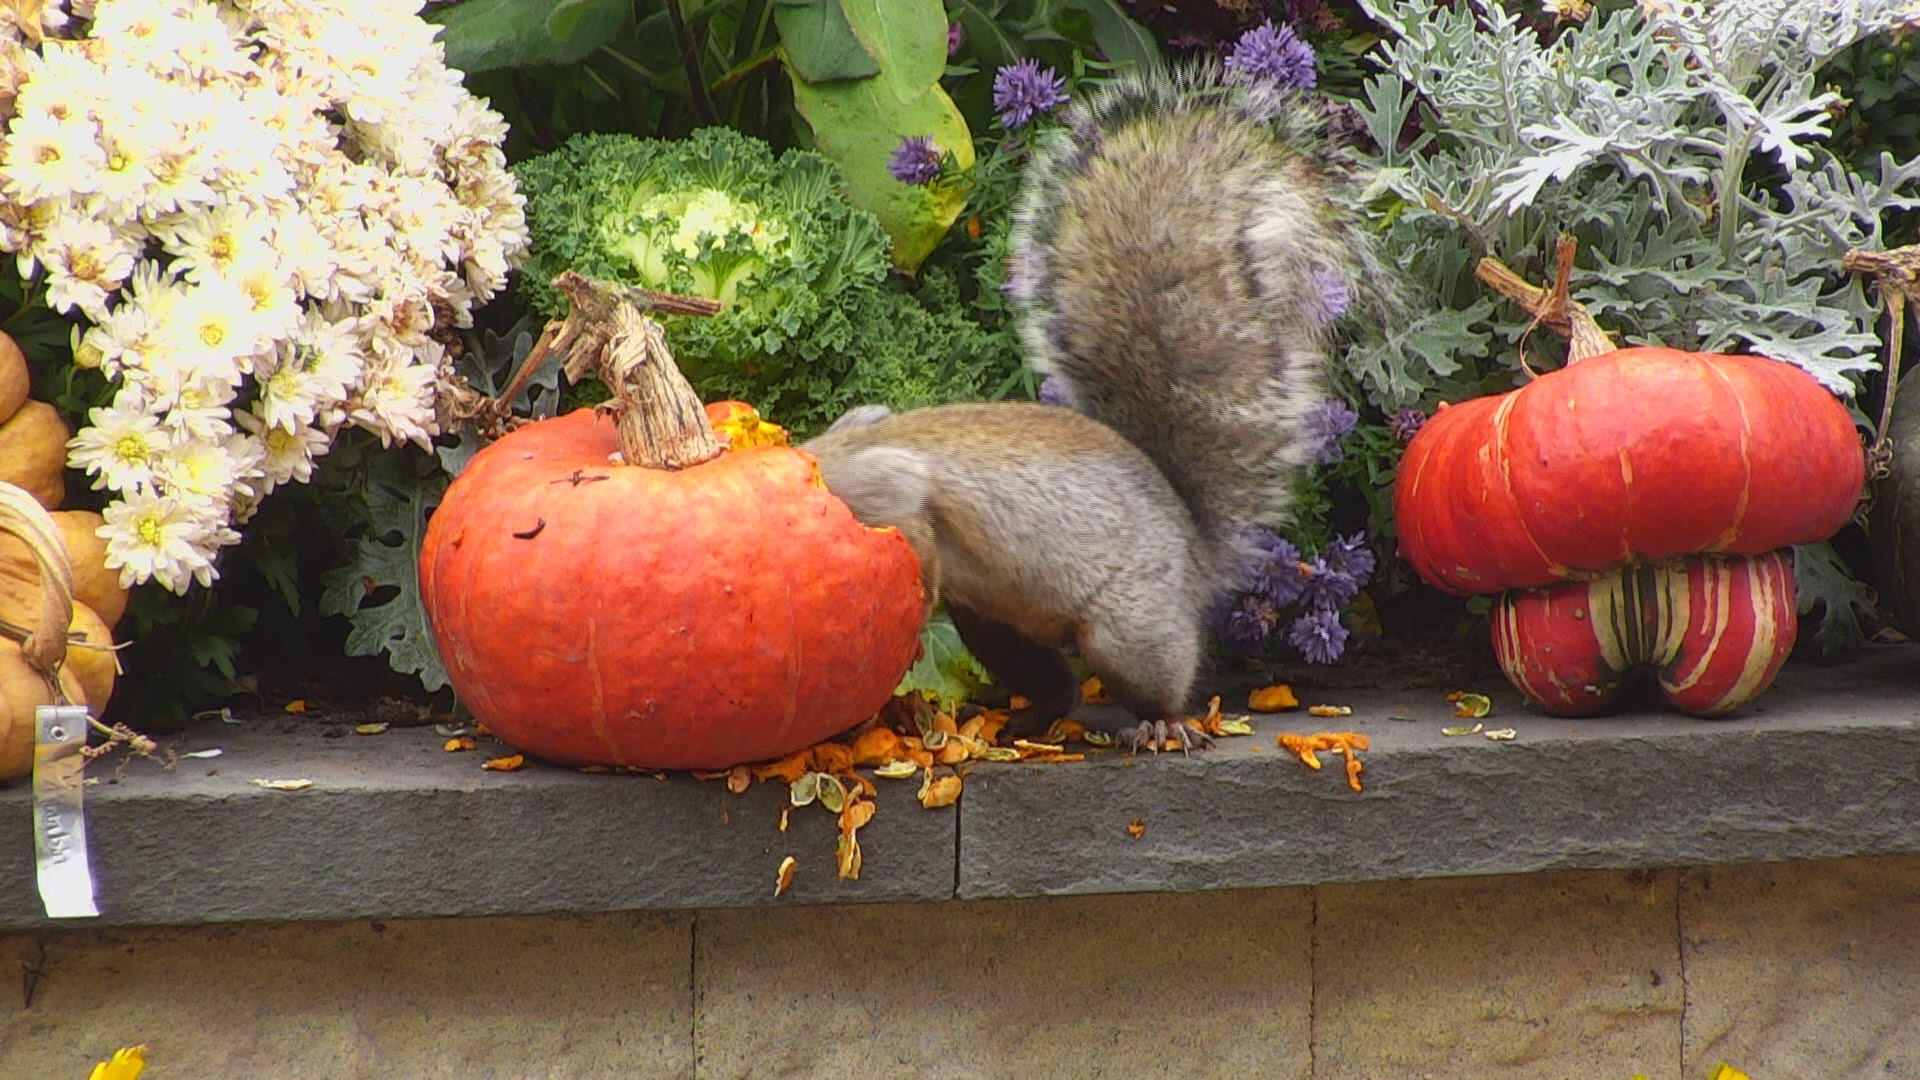 There's always a bigger squirrel... Happy Sunday from our playful backyard critters!